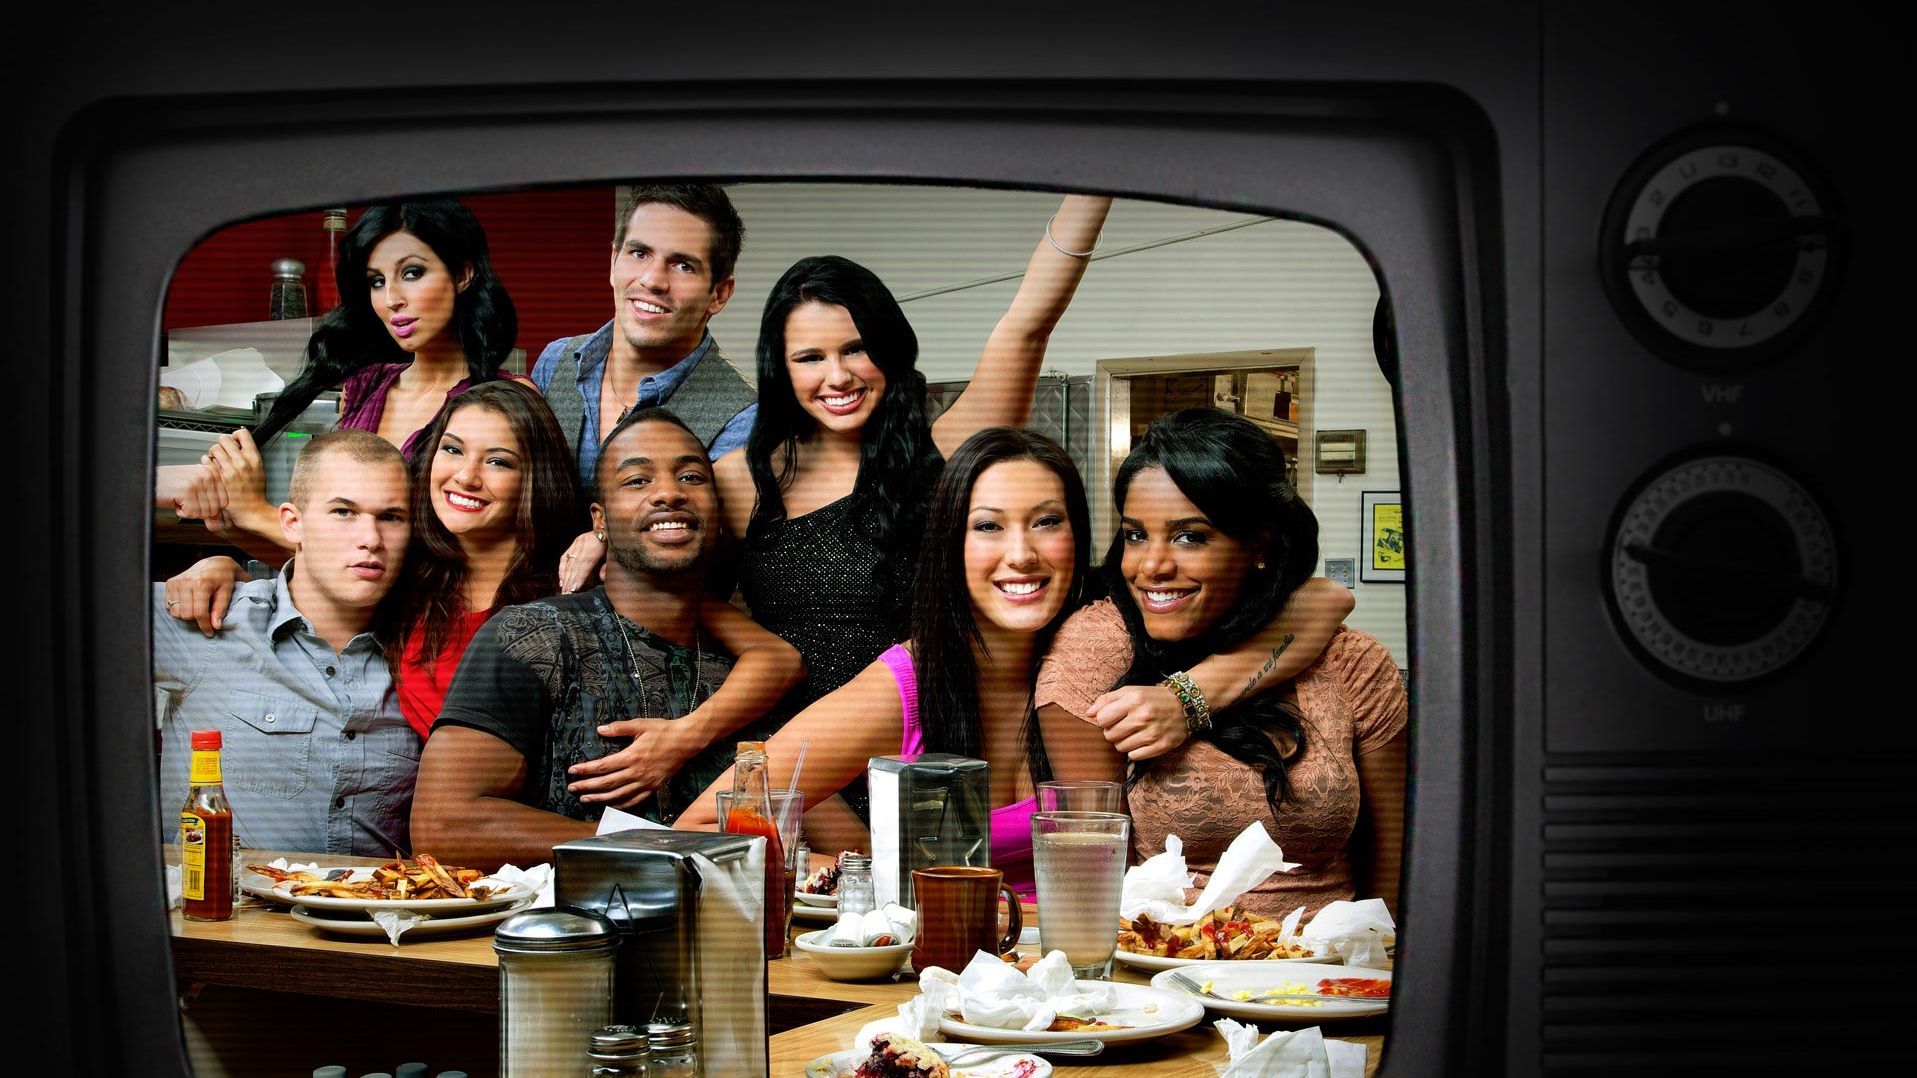 Facebook and MTV are rebooting reality TV pioneer 'The Real World'